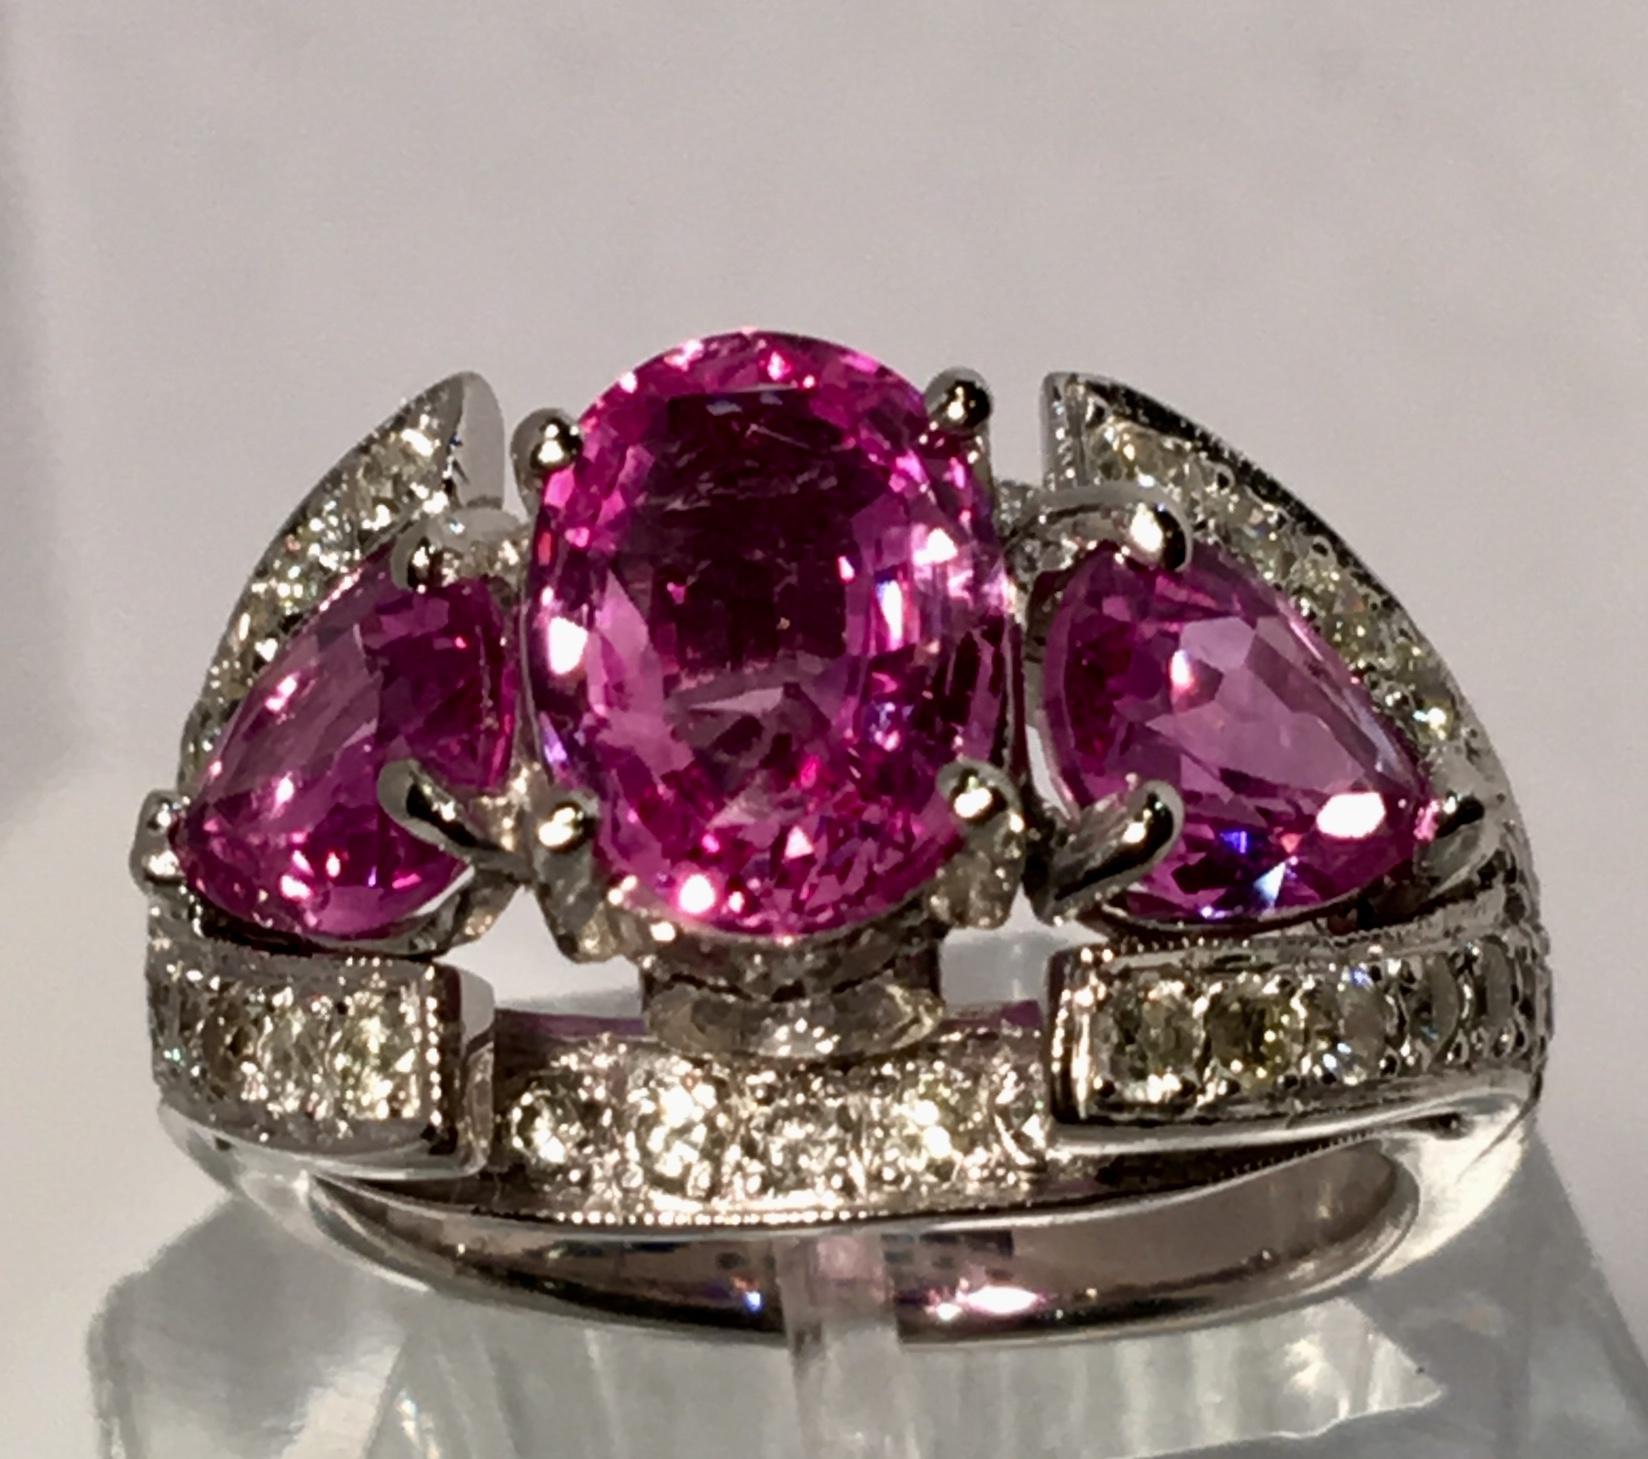 Fantastic from all angles, this custom made, substantial platinum estate three stone ring or engagement ring features a prong set oval cut pink sapphire, flanked with two prong set, pear cut pink sapphire stones, with two bezel set round brilliant